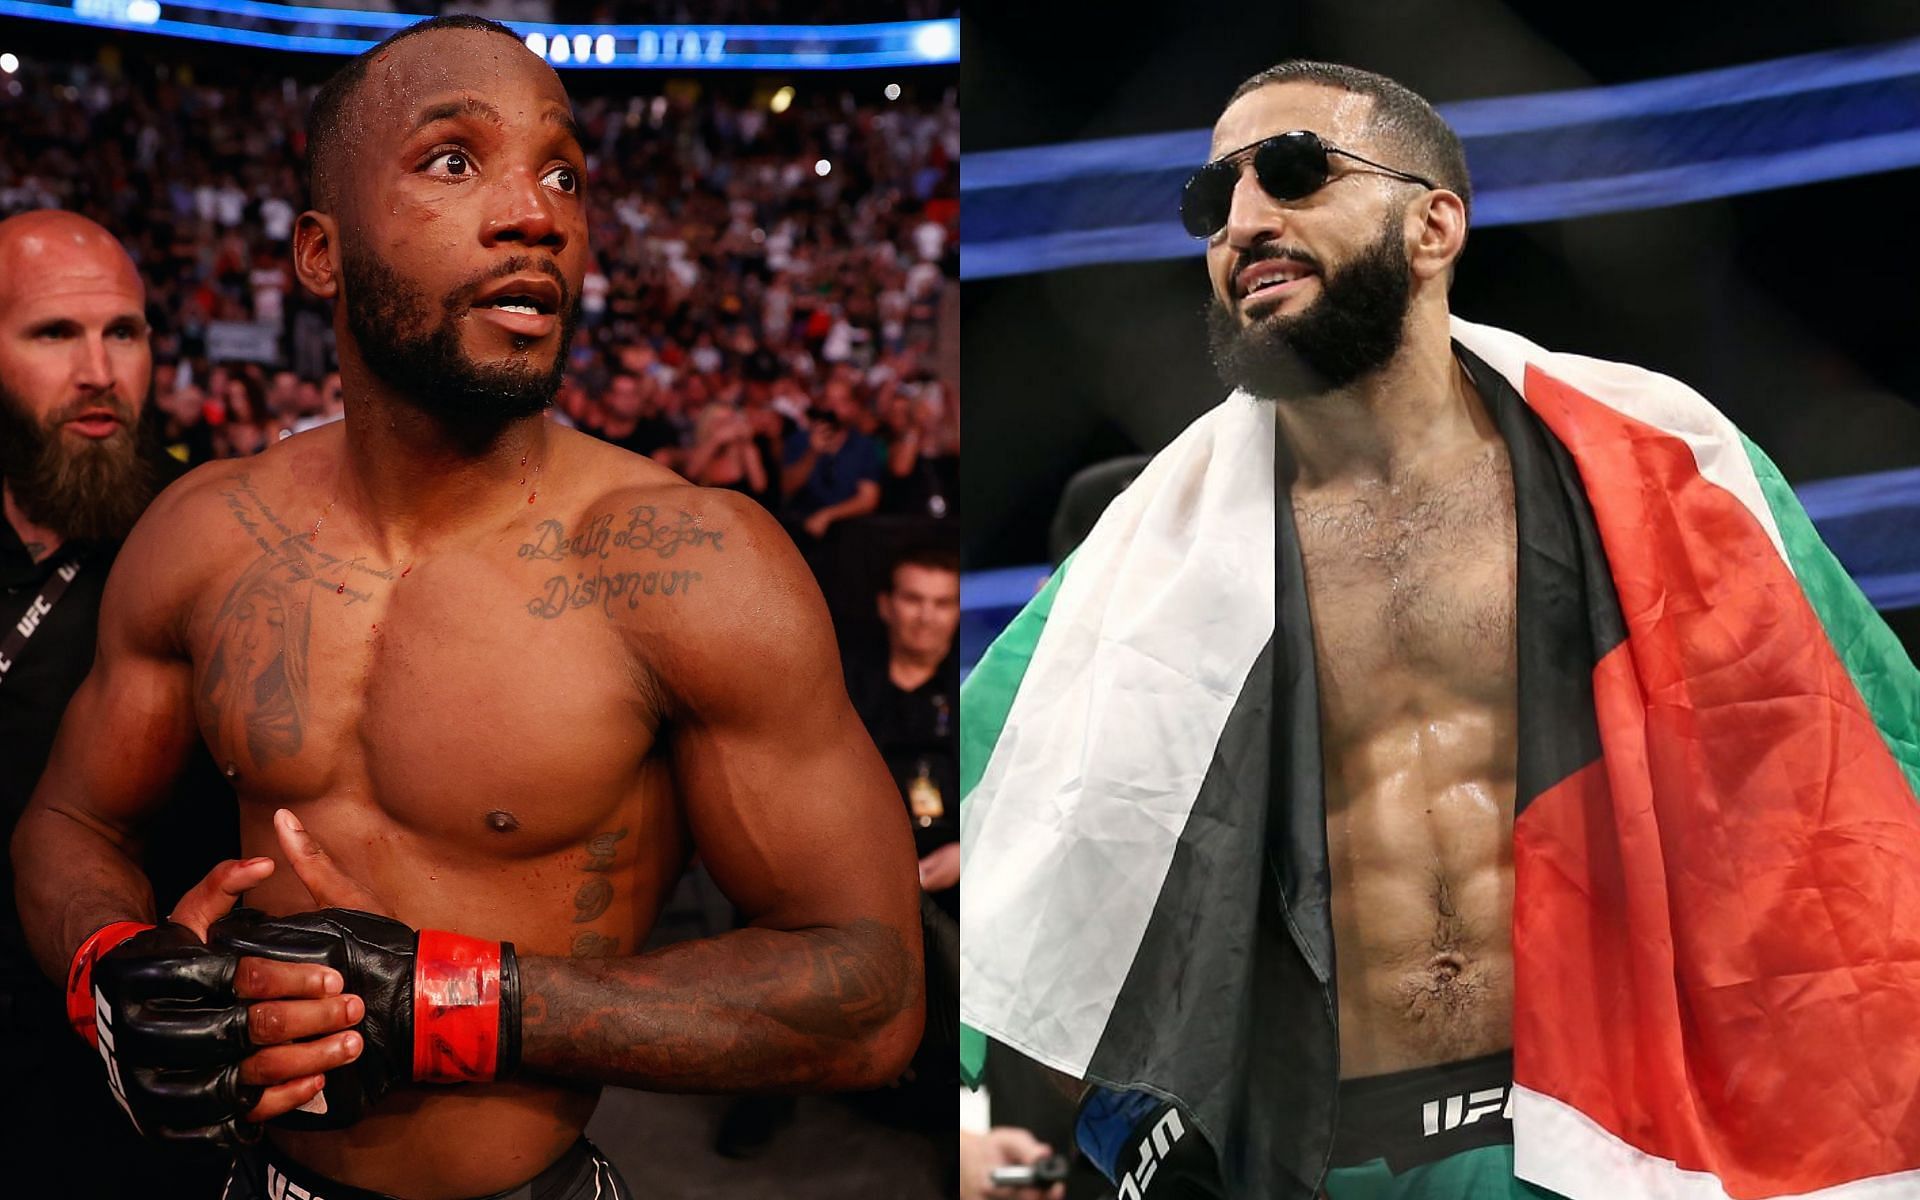 Leon Edwards [left] expected to defend 170-pound championship against Belal Muhammad [right] next [Image via: Getty Images] 